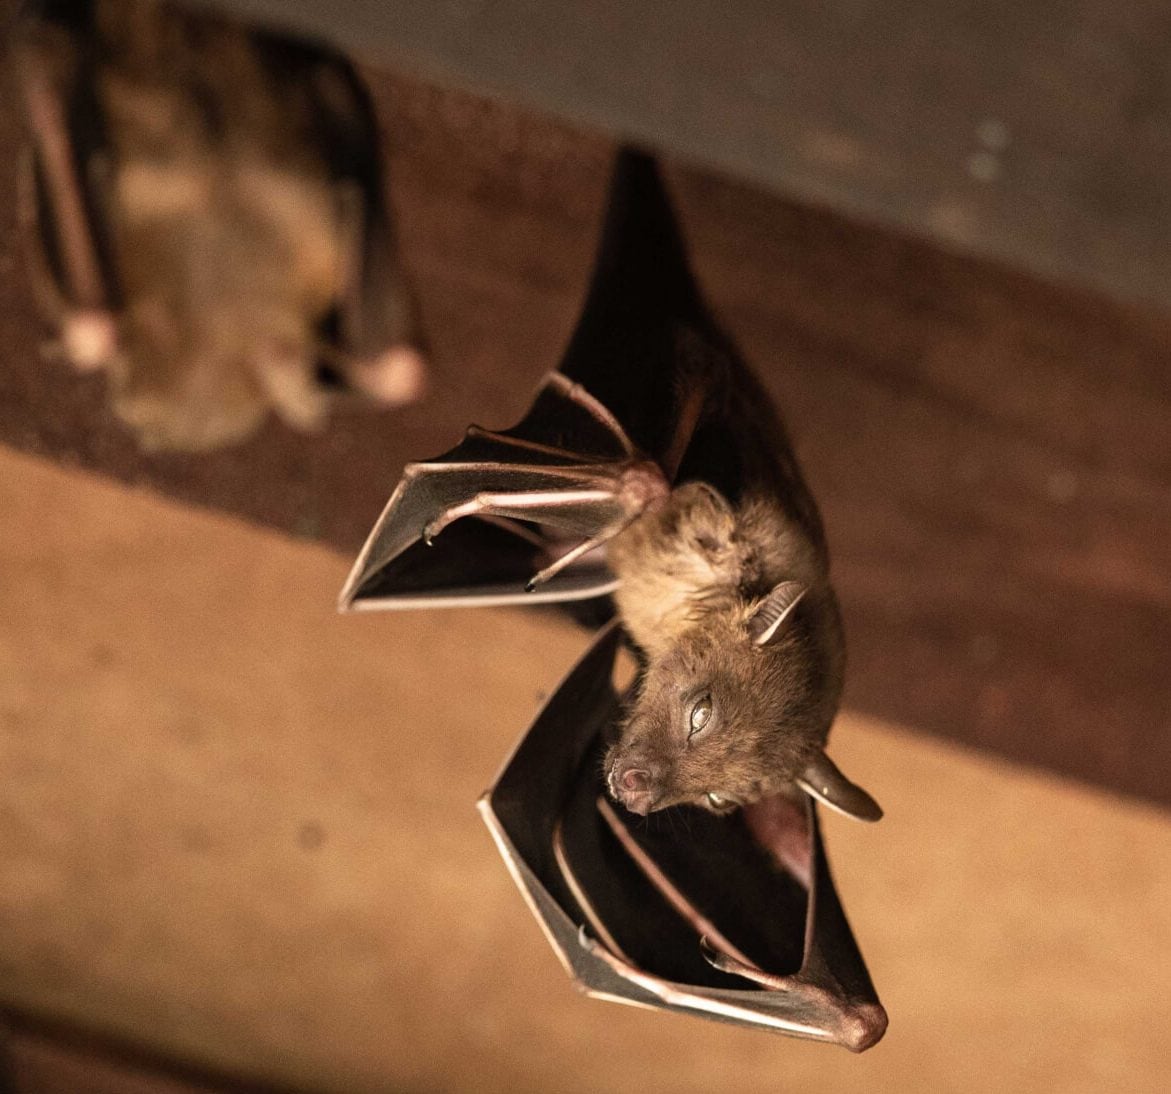 Expert bat removal services for a safe and humane solution in Wichita